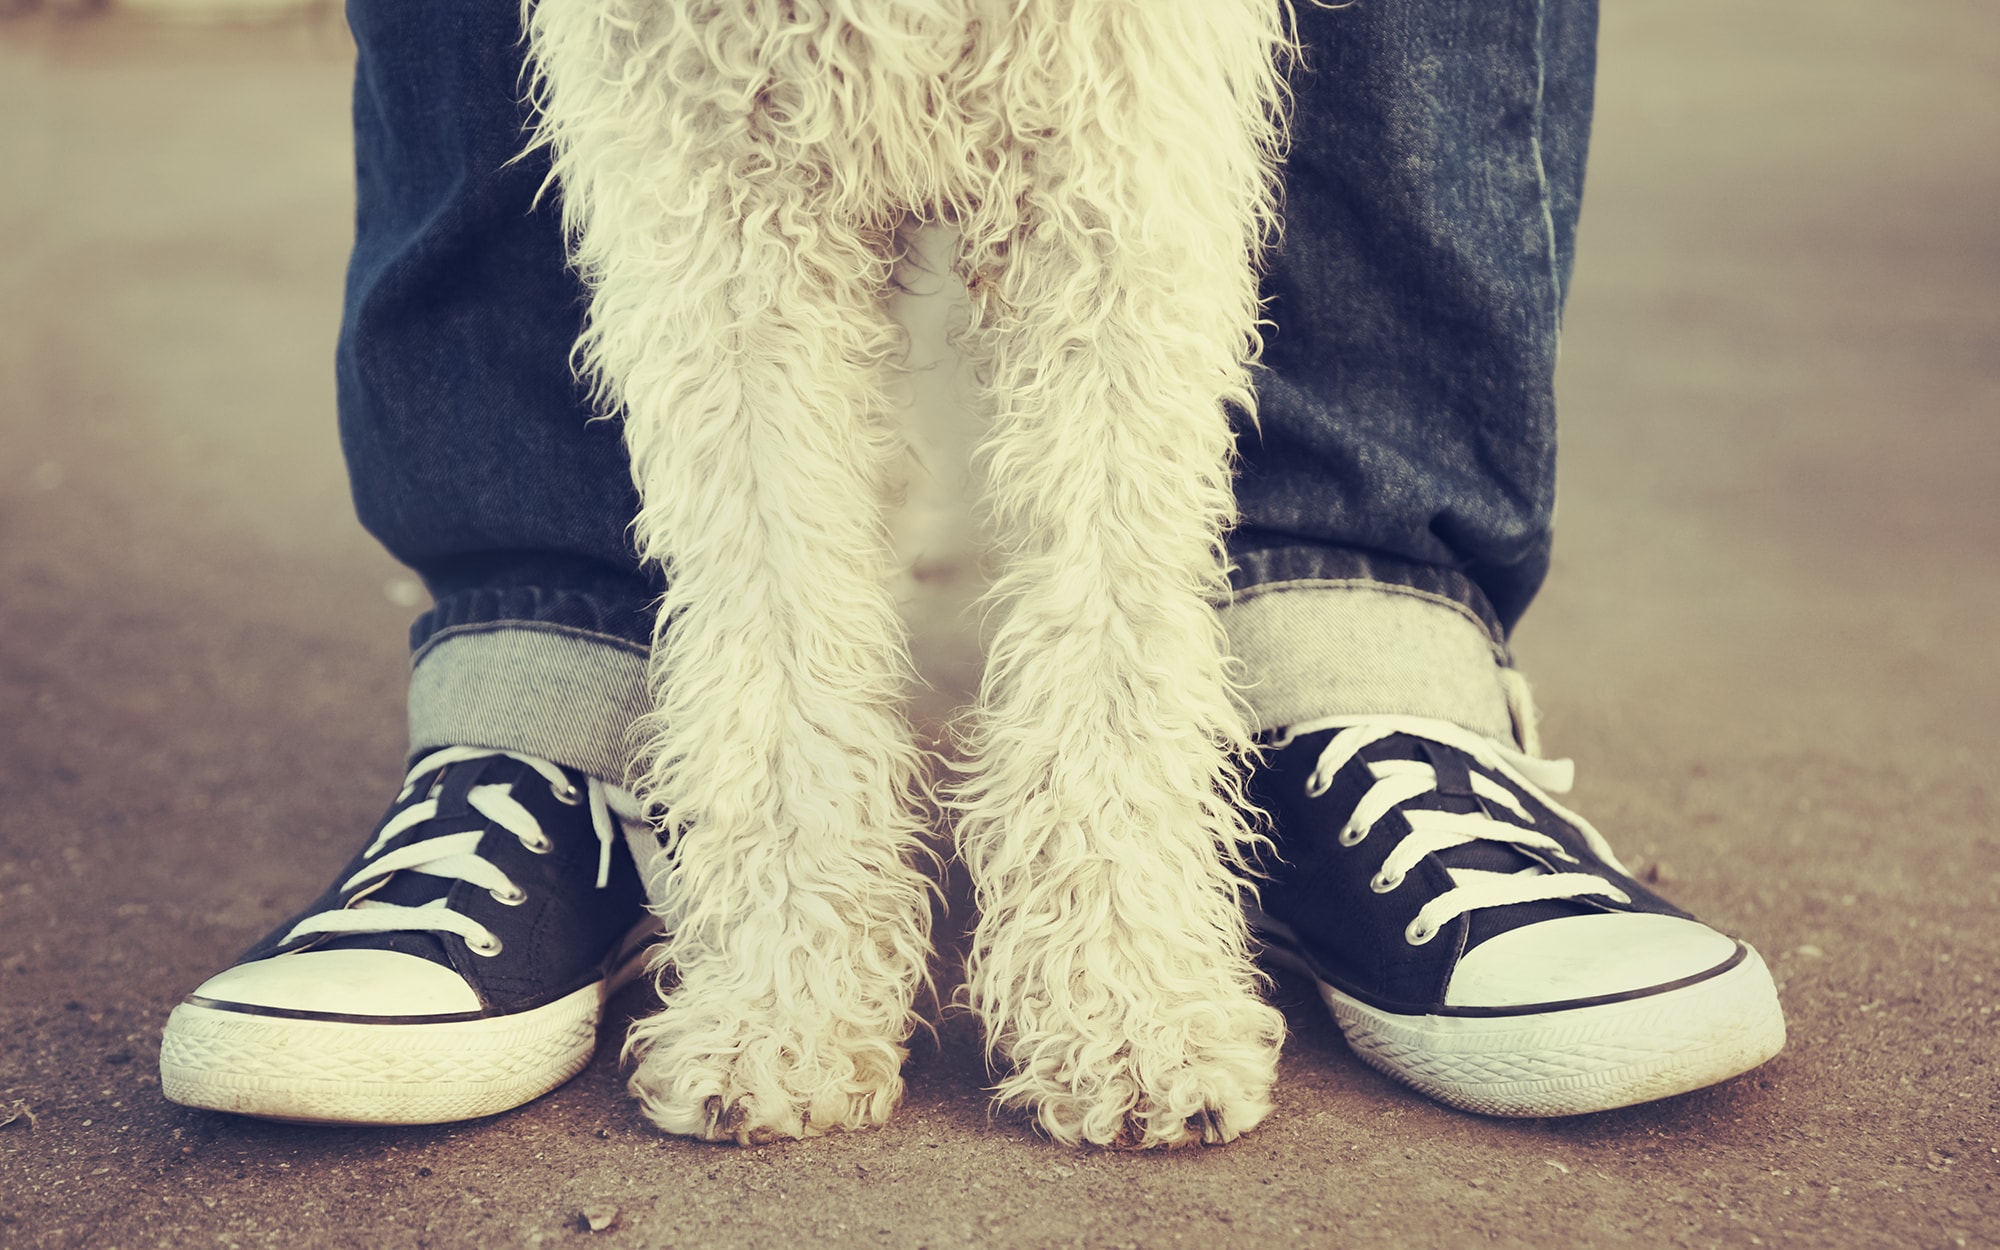 White dog standing in between its owners feet